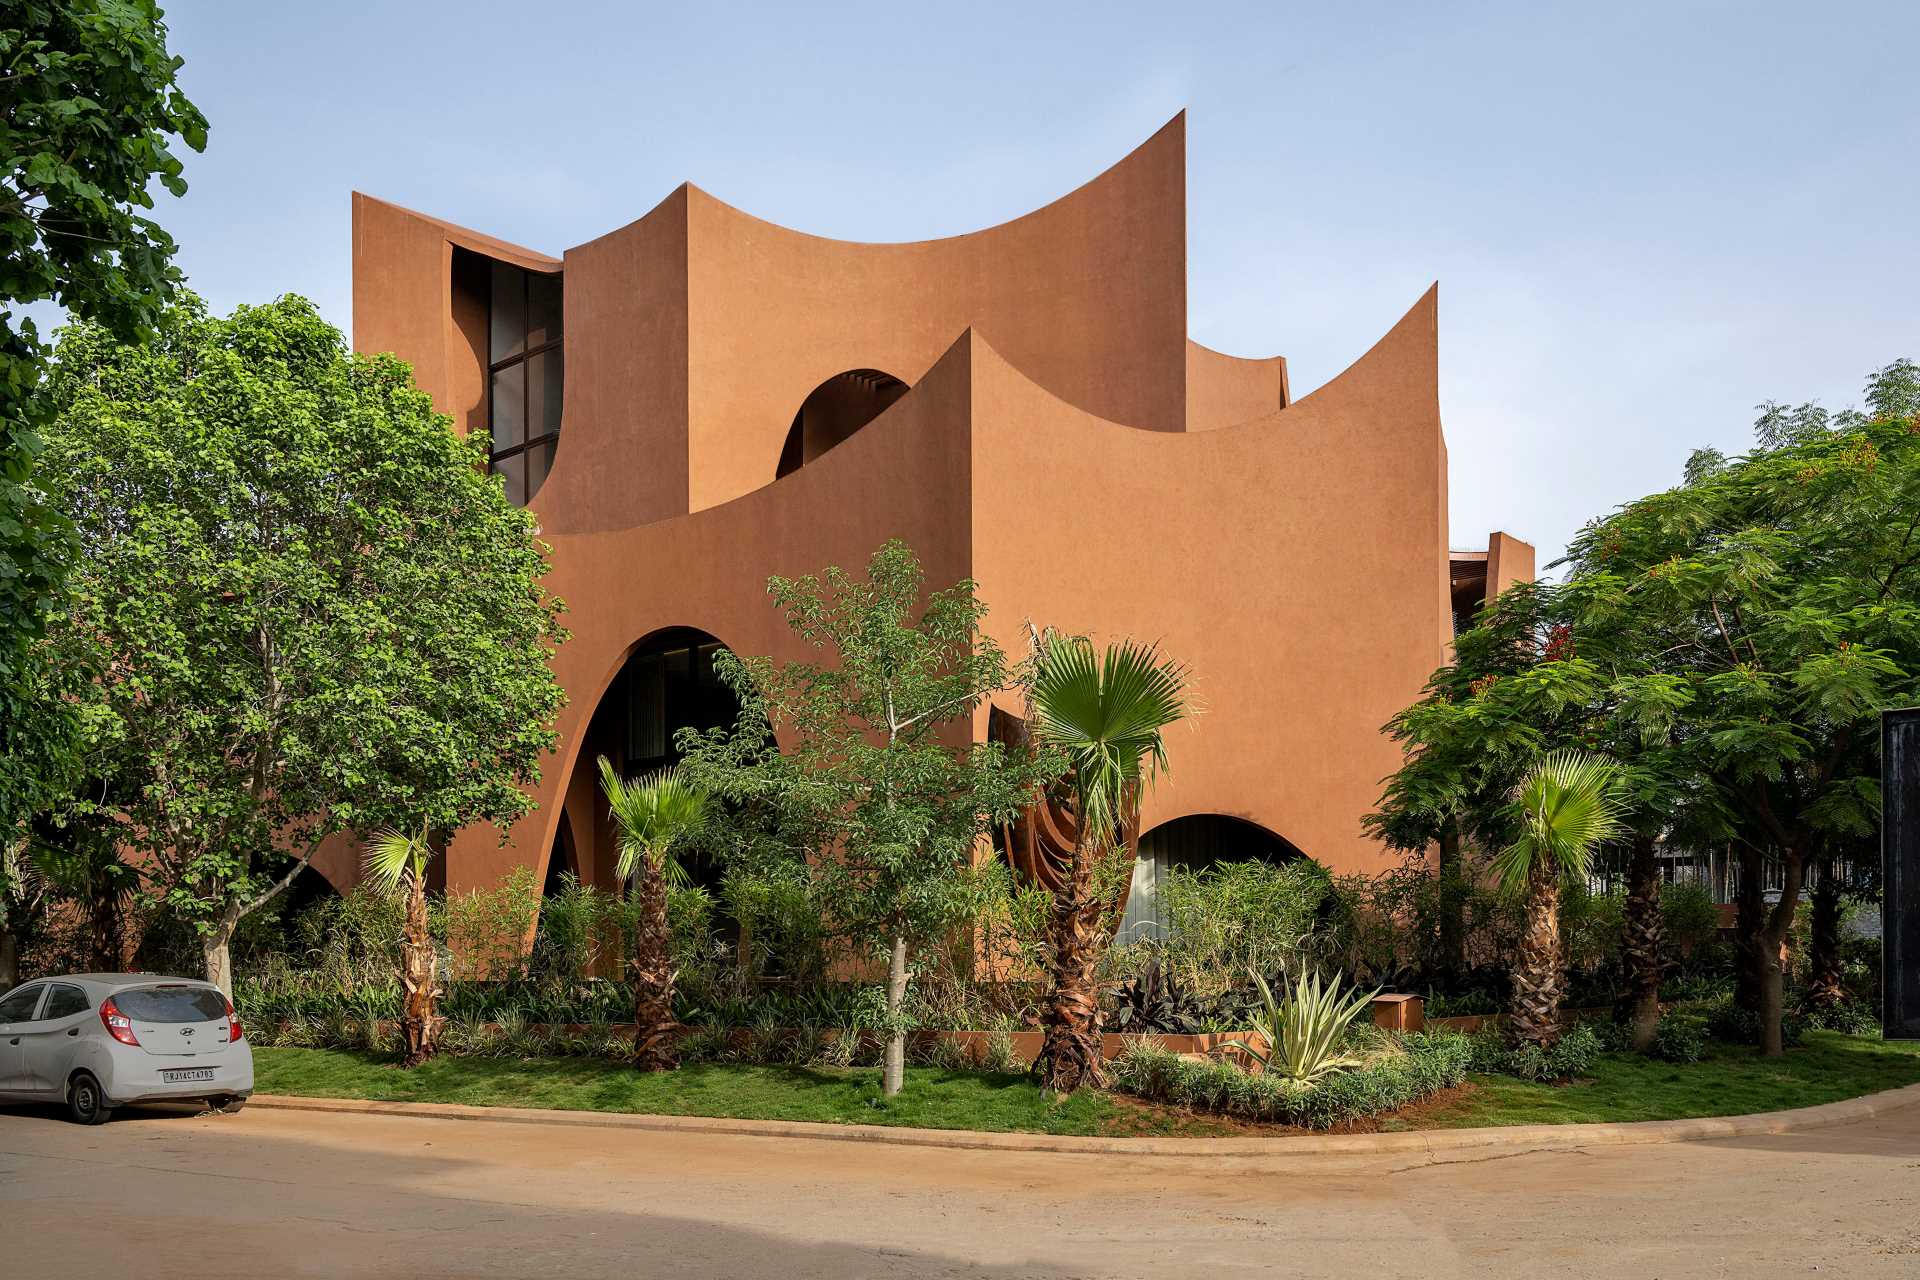 A sculptural house with arches scattered throughout its design